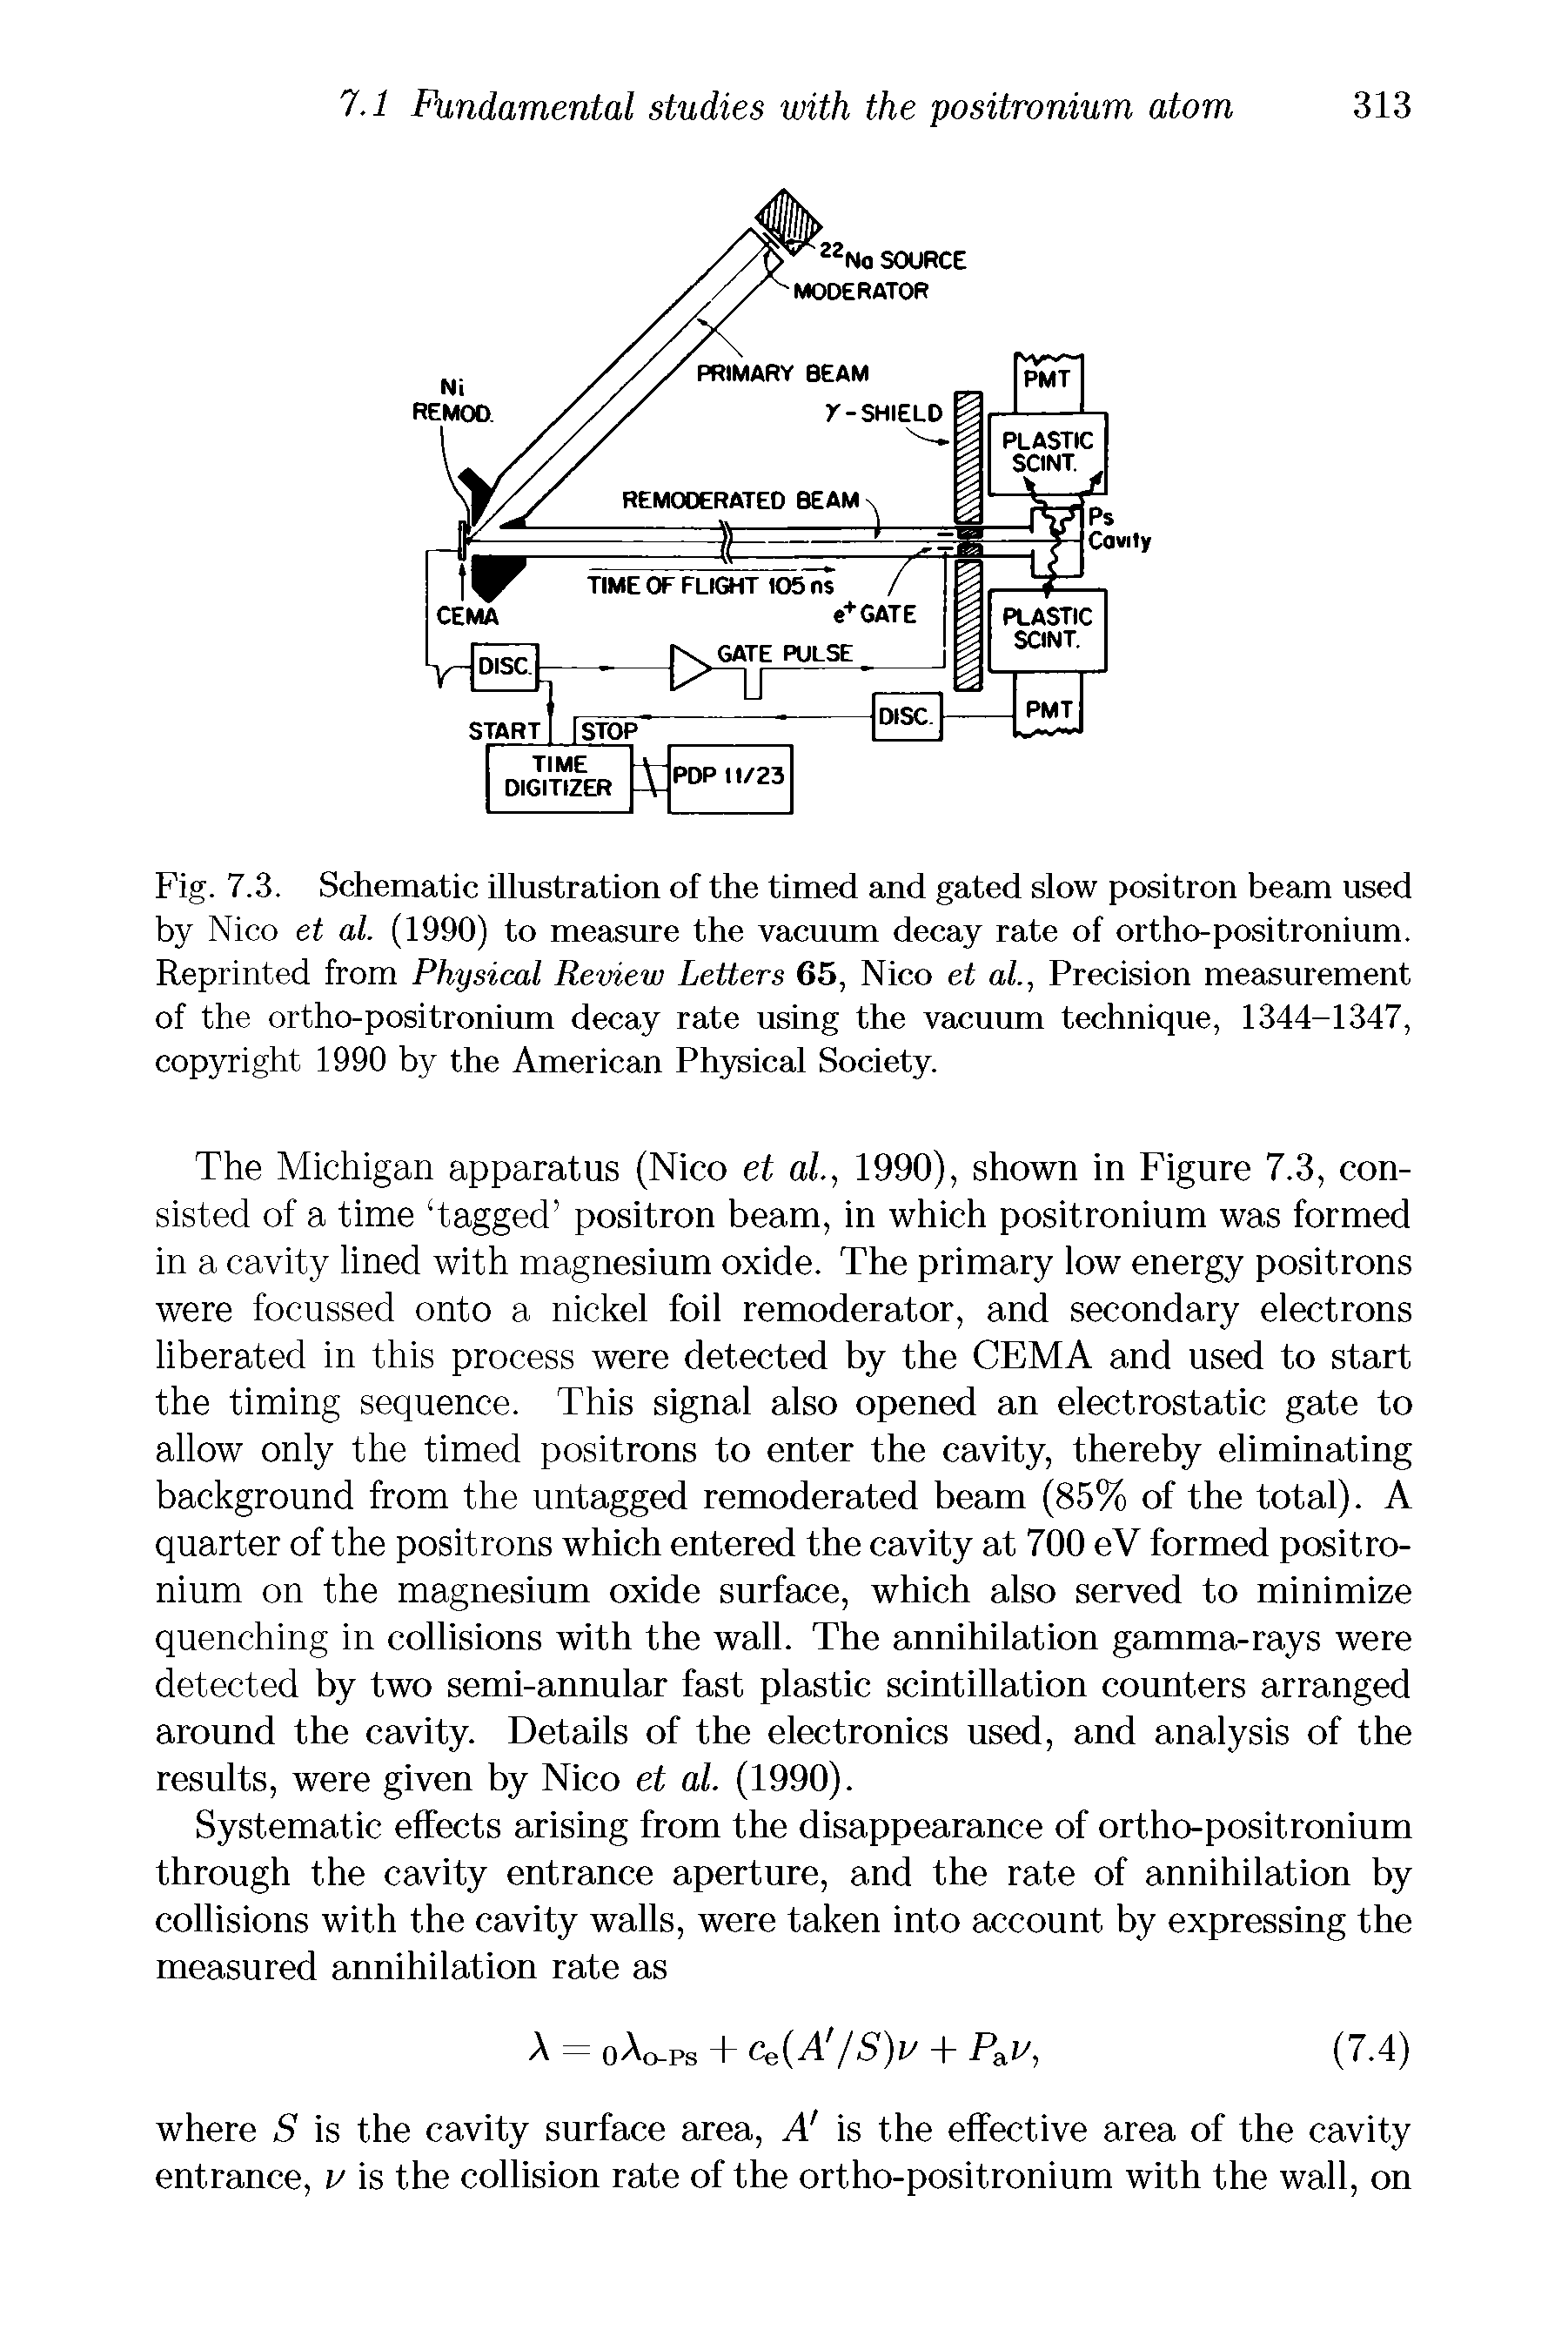 Fig. 7.3. Schematic illustration of the timed and gated slow positron beam used by Nico et al. (1990) to measure the vacuum decay rate of ortho-positronium. Reprinted from Physical Review Letters 65, Nico et at, Precision measurement of the ortho-positronium decay rate using the vacuum technique, 1344-1347, copyright 1990 by the American Physical Society.